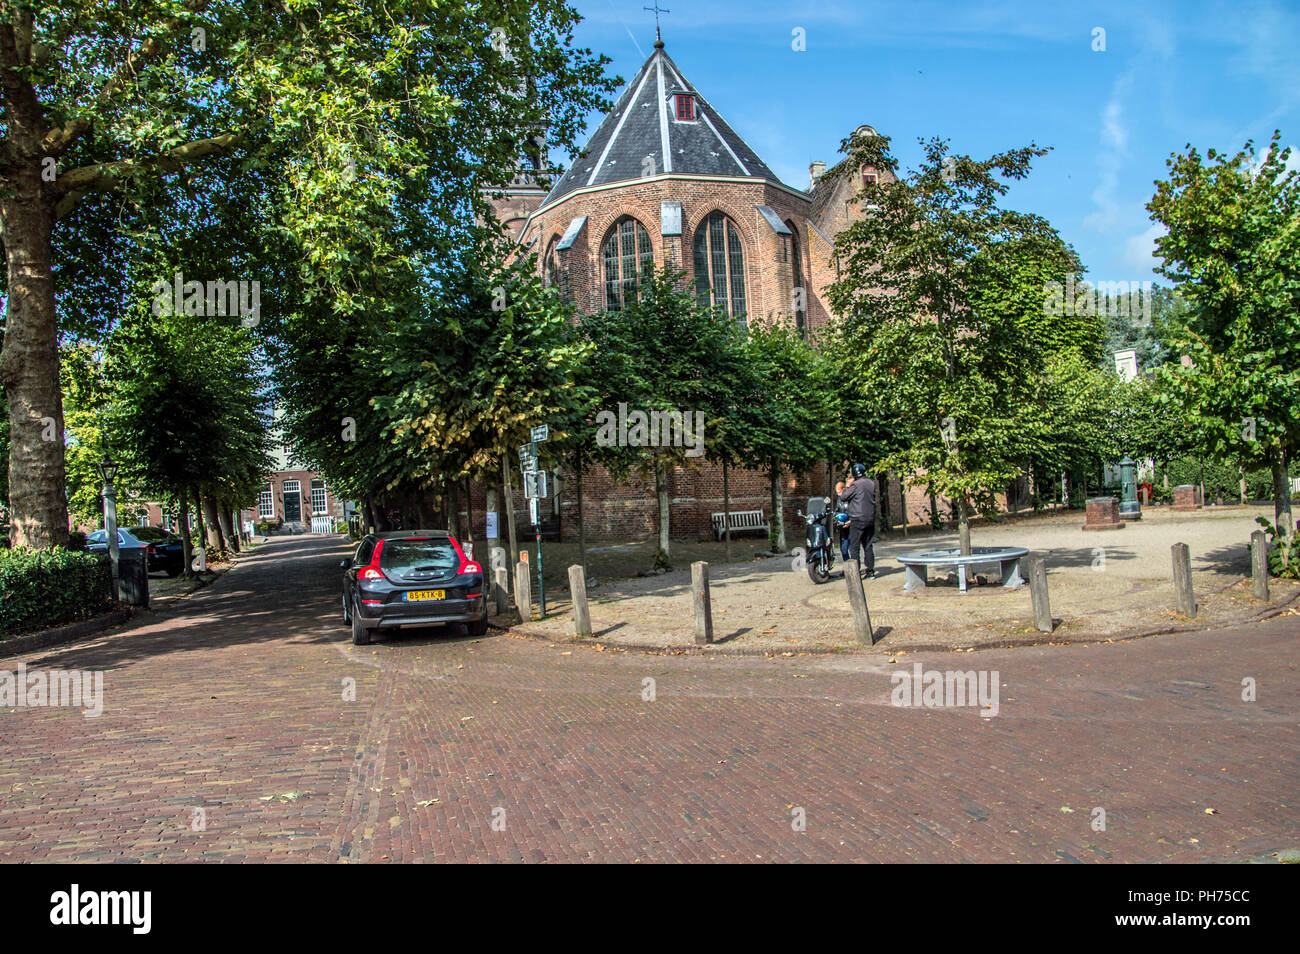 The Protestant Church At Broek In Waterland The Netherlands 2018 Stock Photo